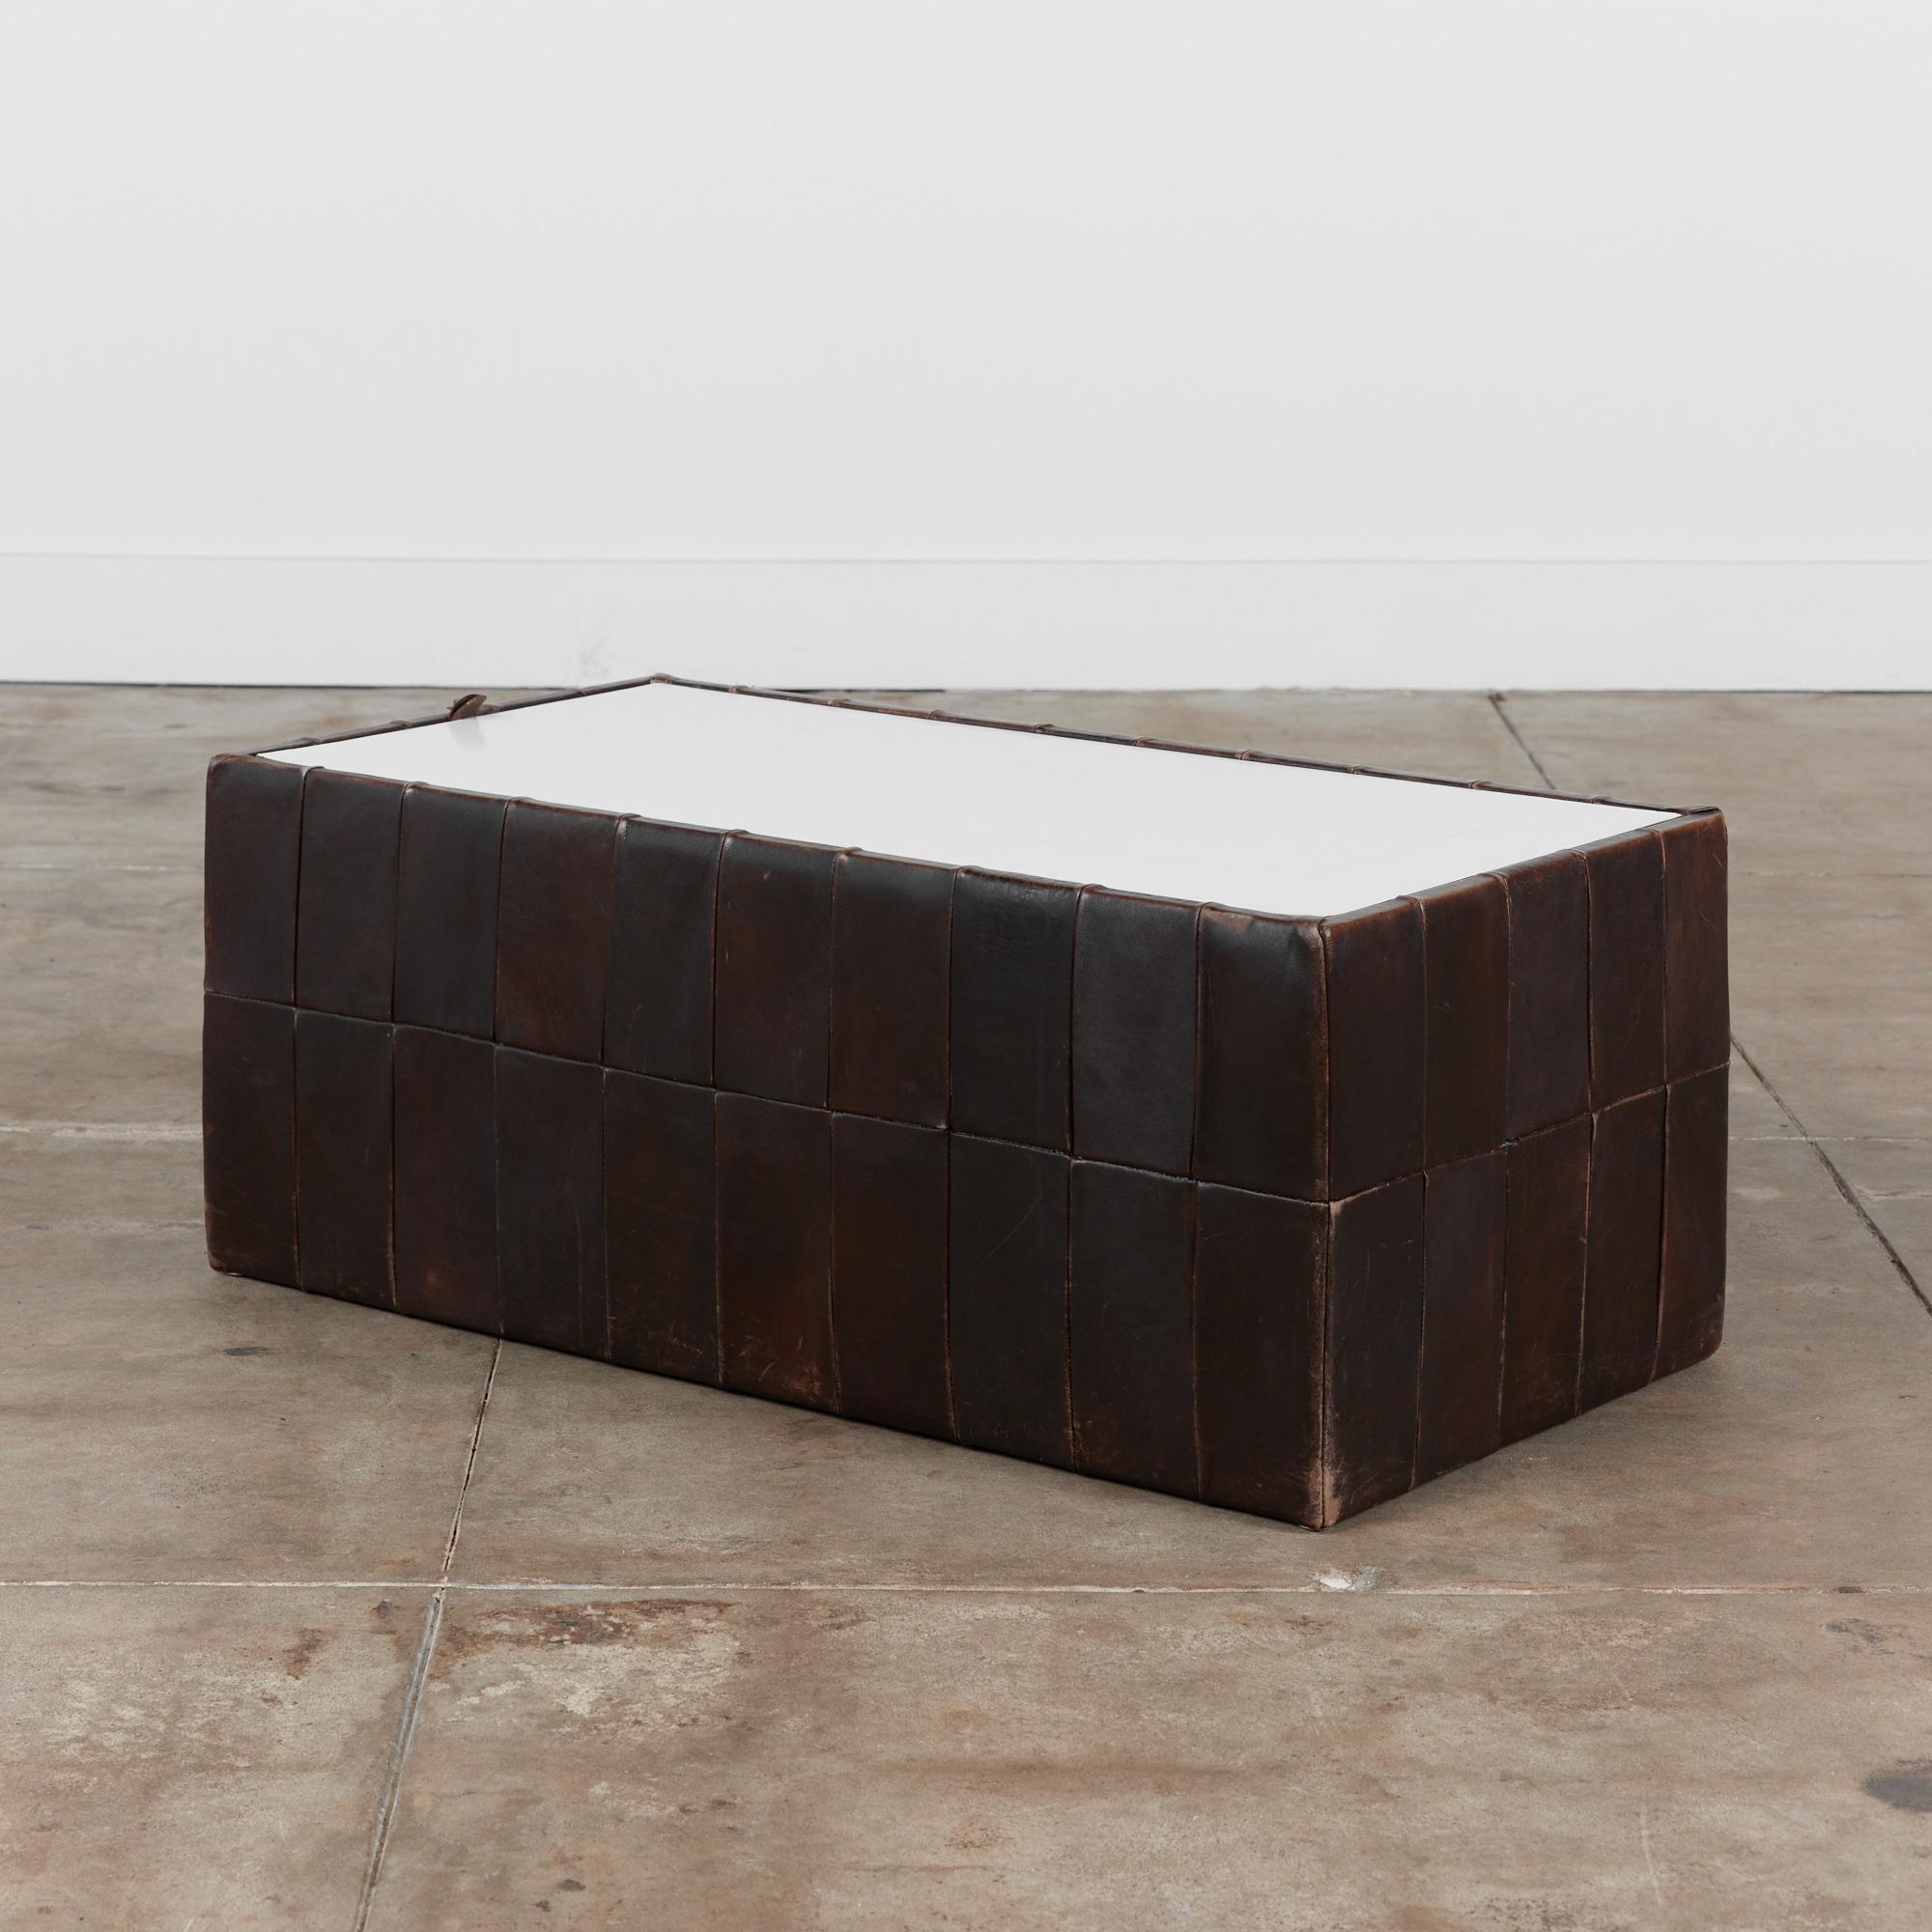 Leather patchwork storage cube by De Sede, Switzerland, circa 1960s. The cube features a patinated patchwork leather exterior around the entire cube with a removable white laminate top. The top of the table can open for storage or simply be used as